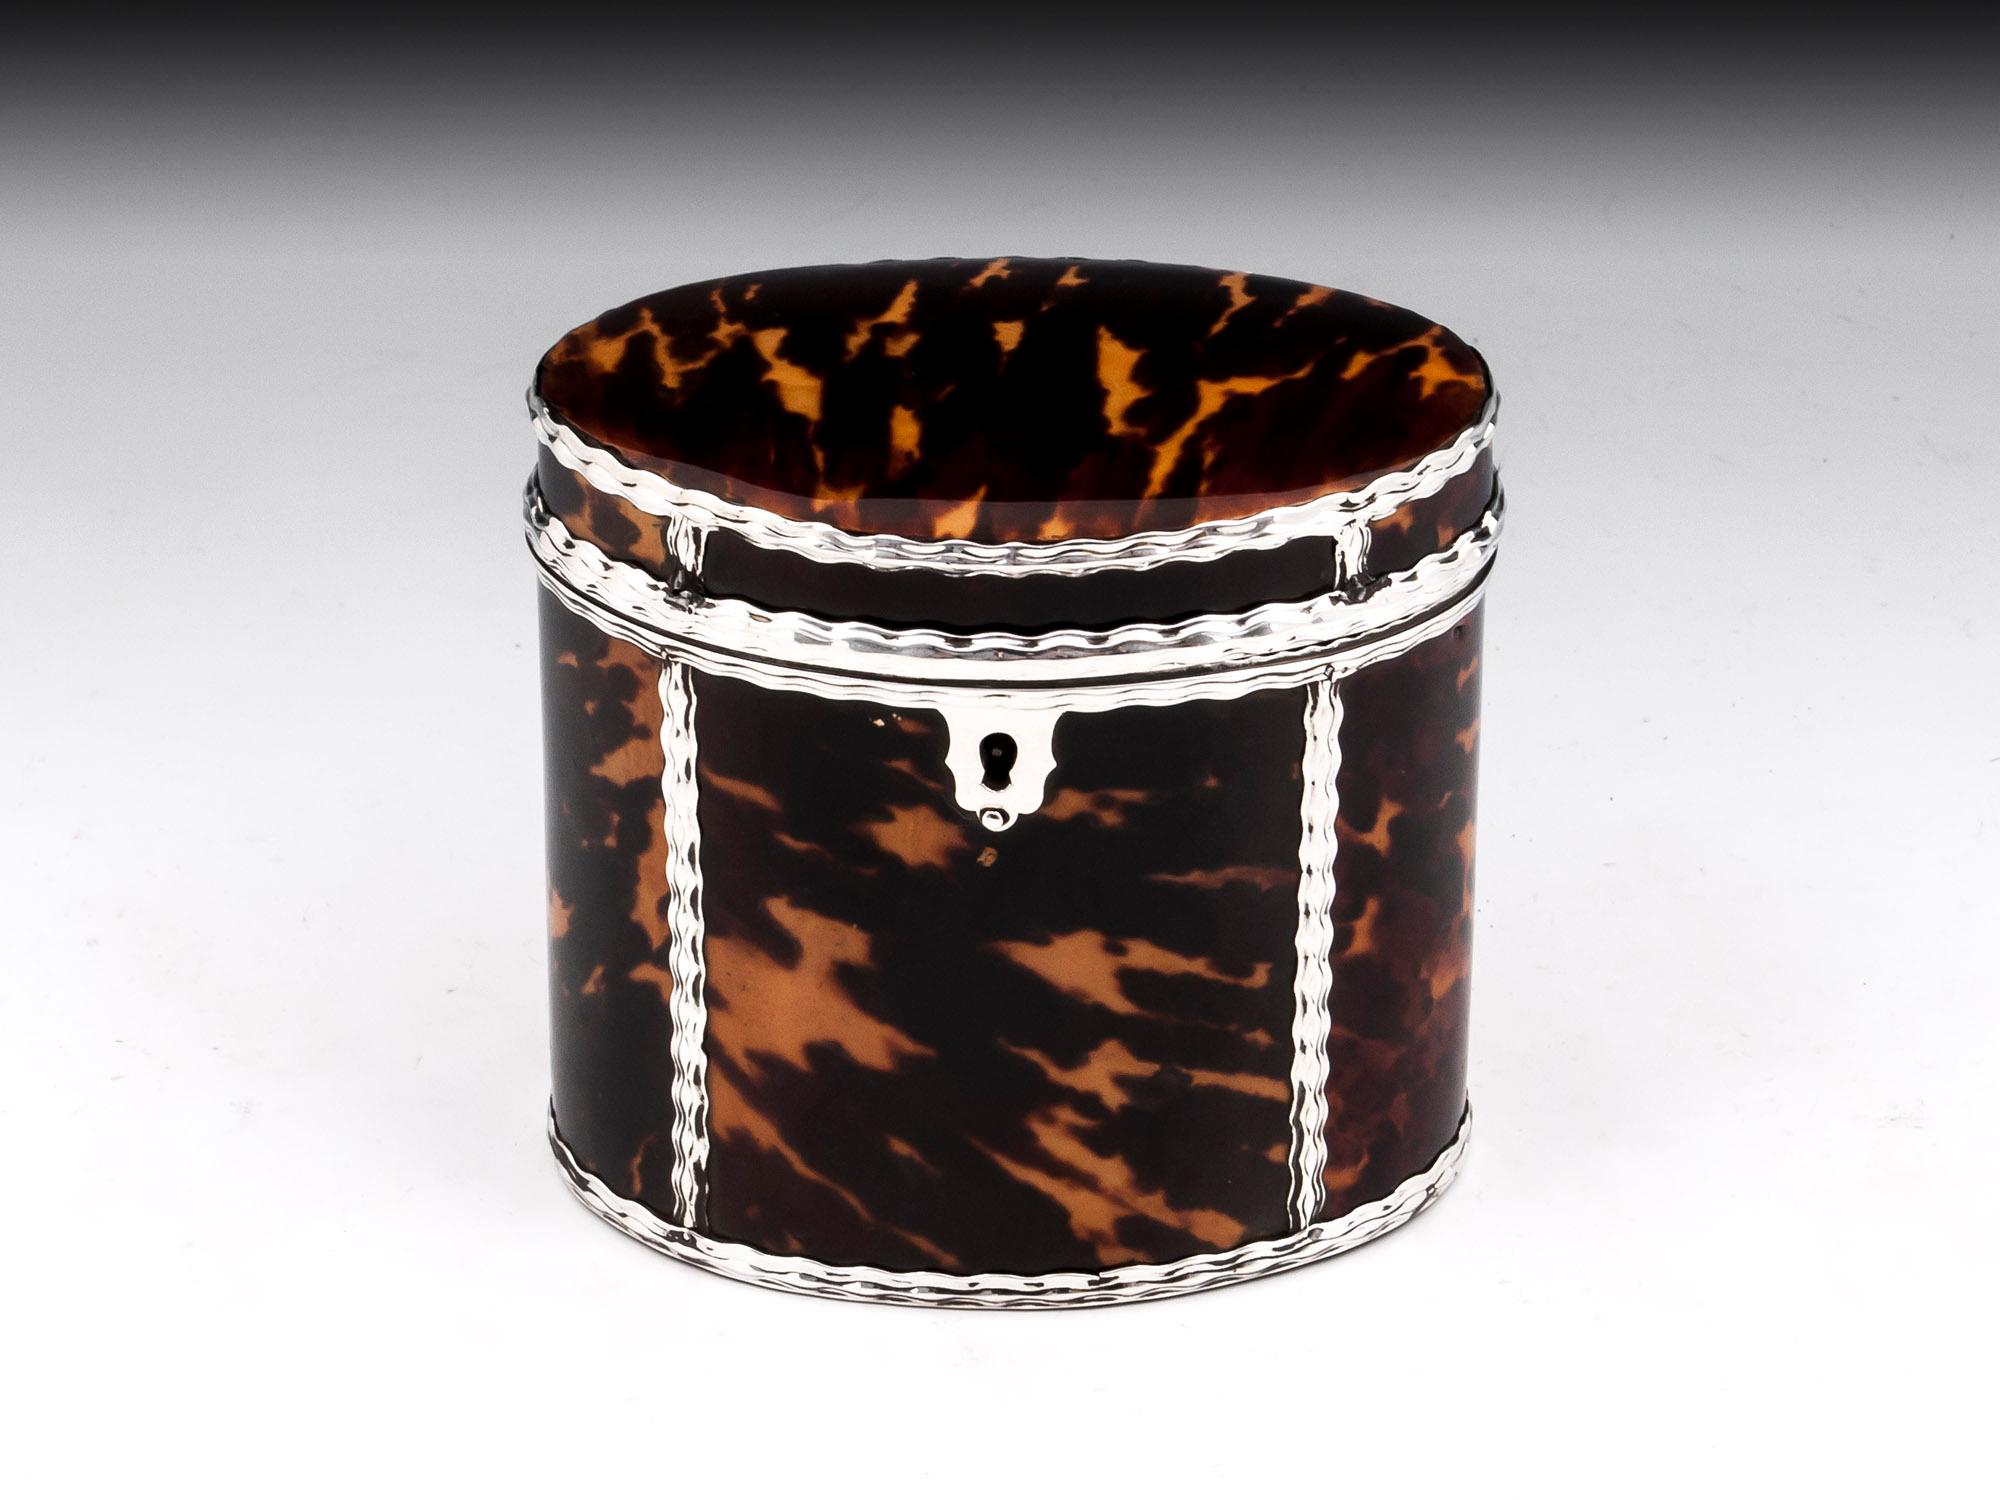 Small oval tortoiseshell Tea Caddy with applied pressed silver with a rippled design. The front has an ornate silver escutcheon. The tortoiseshell & silver tea caddy interior contains most of its original tin lining with a rippled silver surround